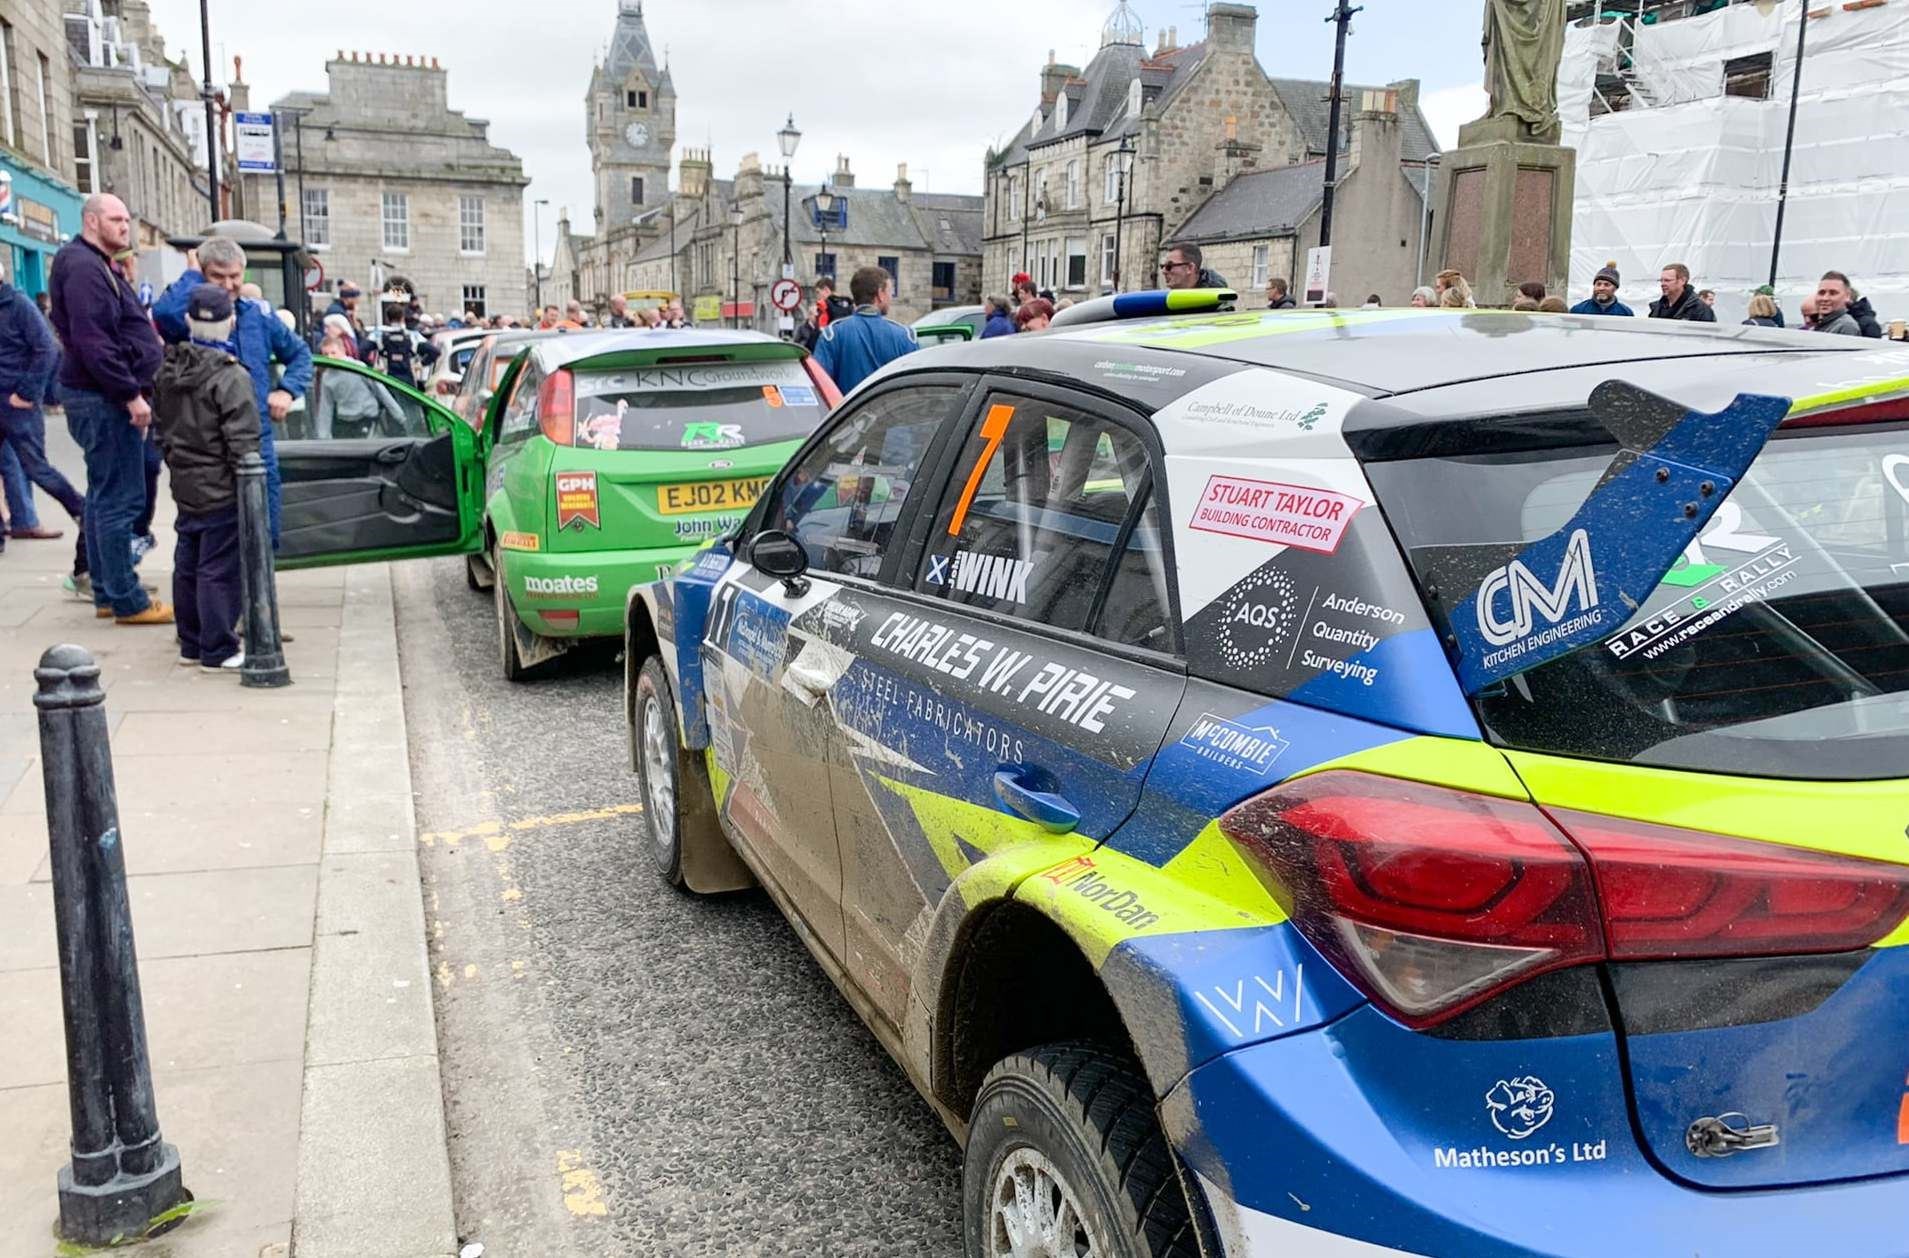 Home favourite John Wink's car parked in The Square at Huntly during the 2023 Speyside Stages.